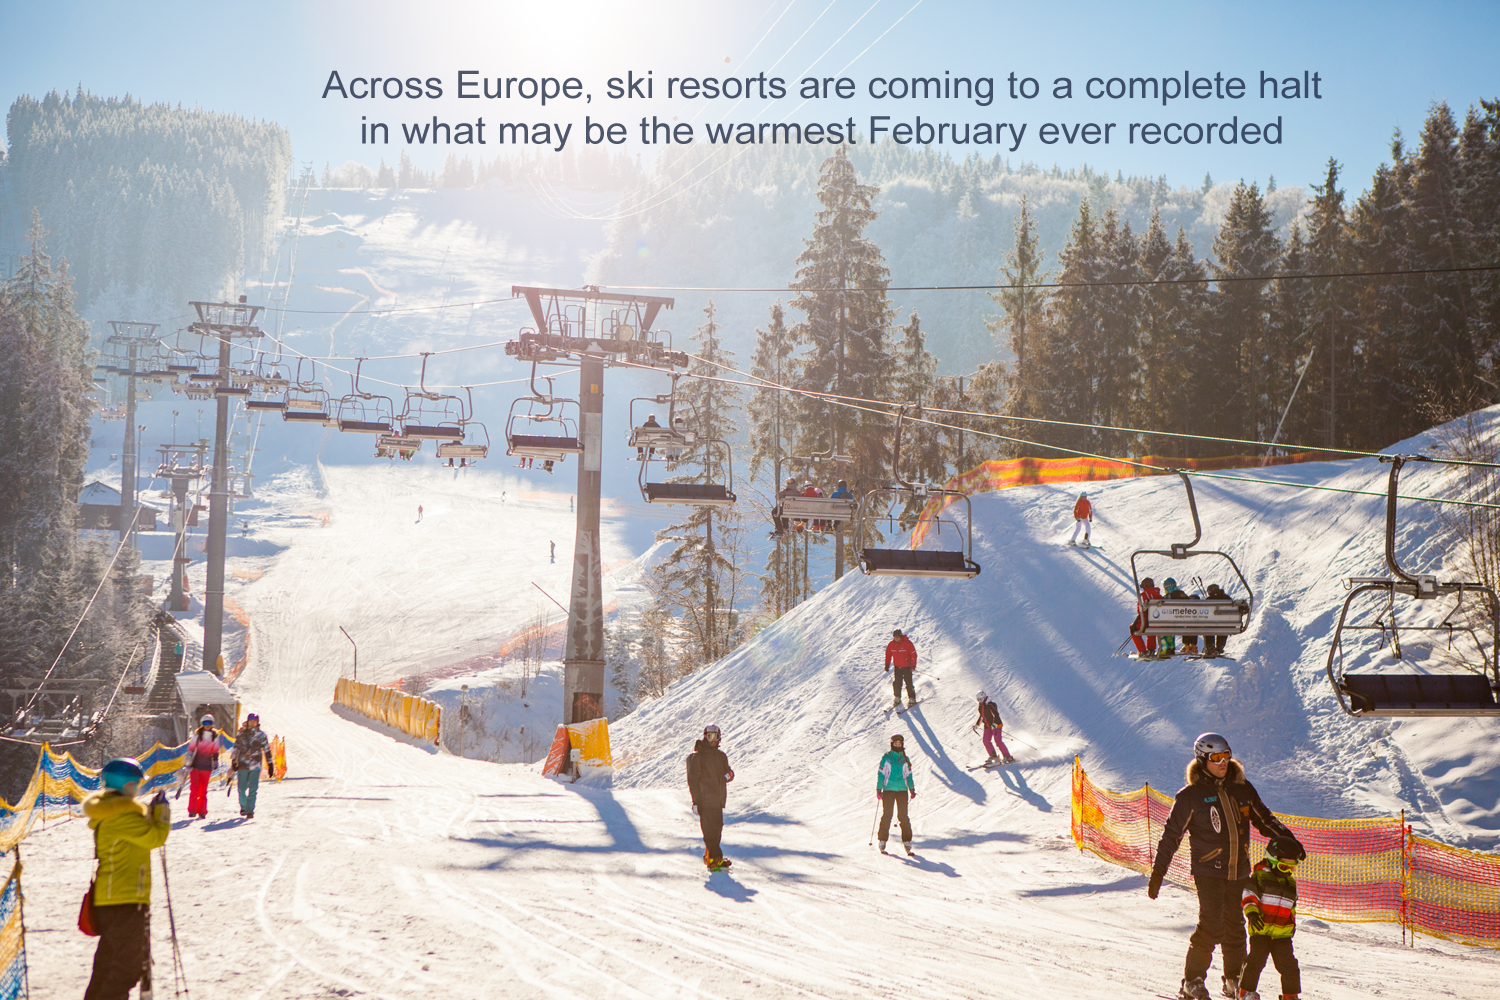 Across Europe, ski resorts are coming to a complete halt in what may be the warmest February ever recorded